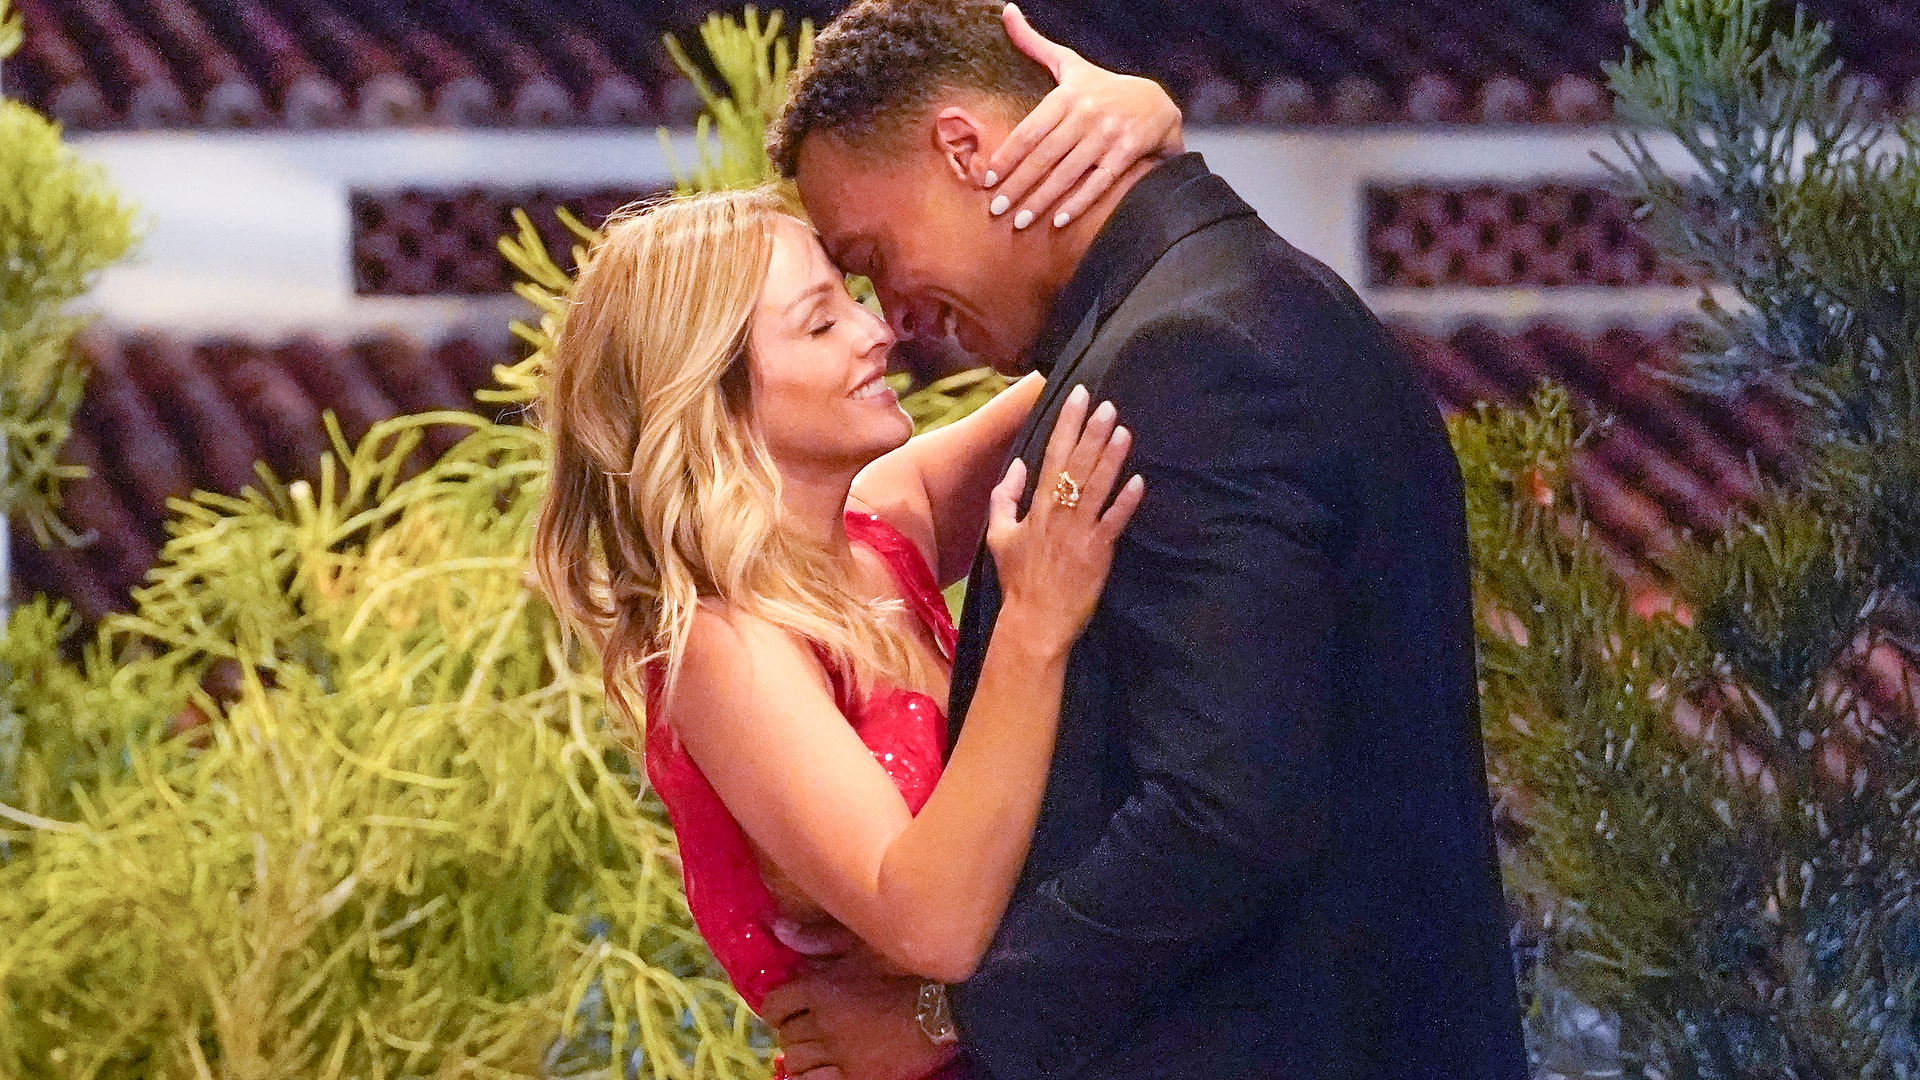 Clare Crawley and Dale Moss on 'The Bachelorette' Season 16 Episode 4